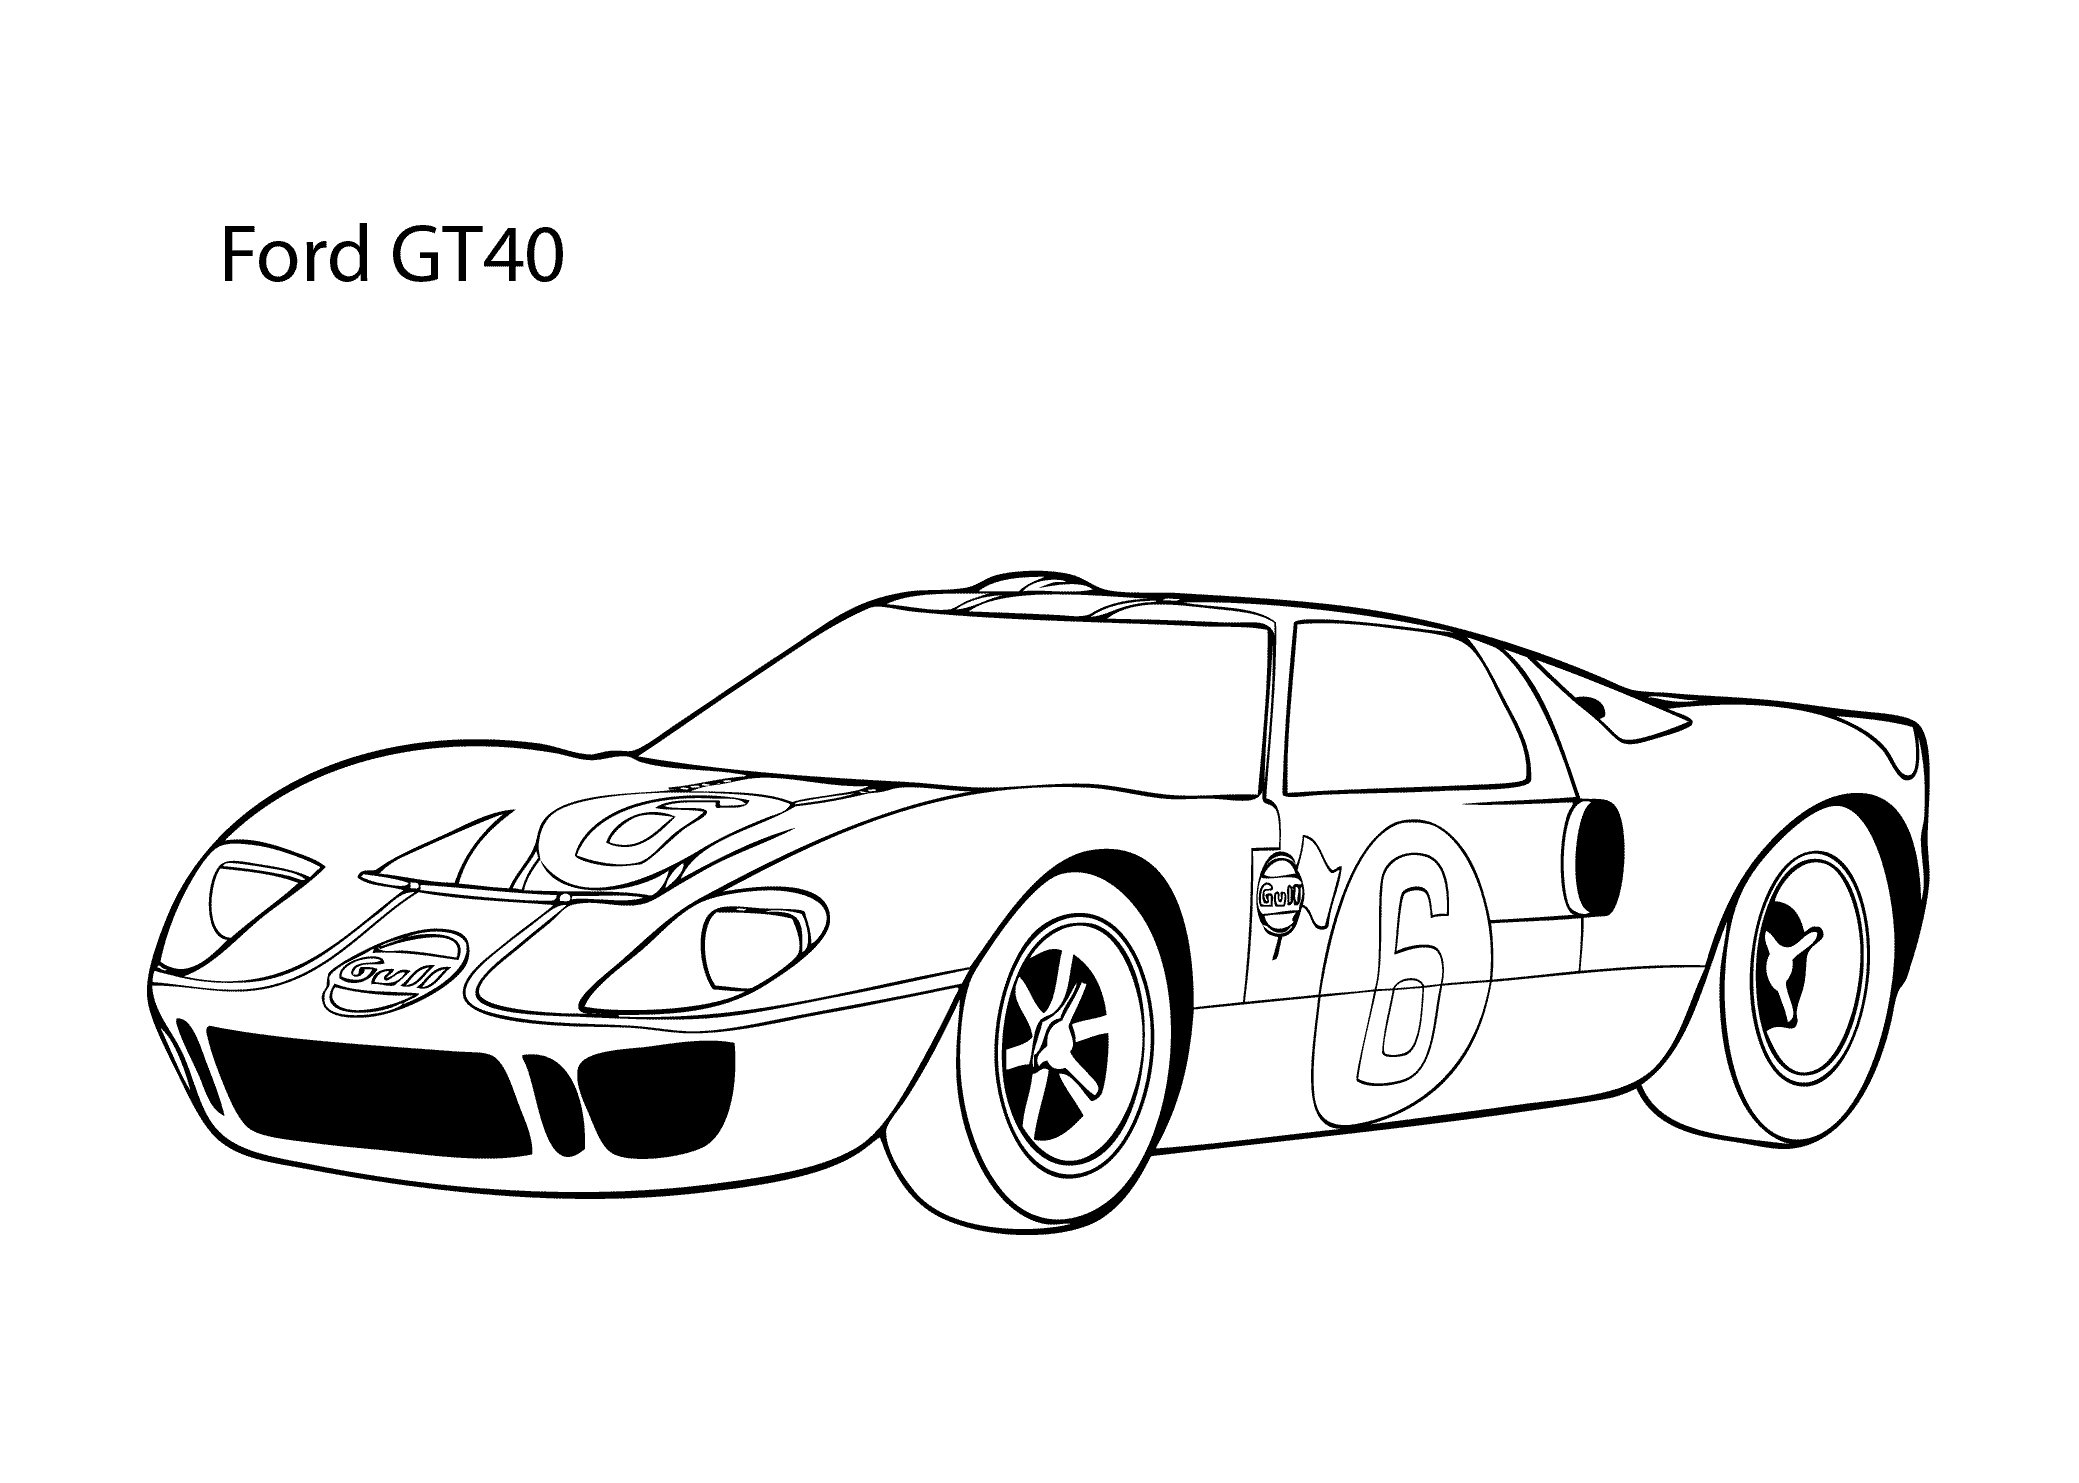 https://cdn.lowgif.com/small/1c17527f6d45e79c-super-car-ford-gt40-coloring-page-cool-car-printable-free.gif